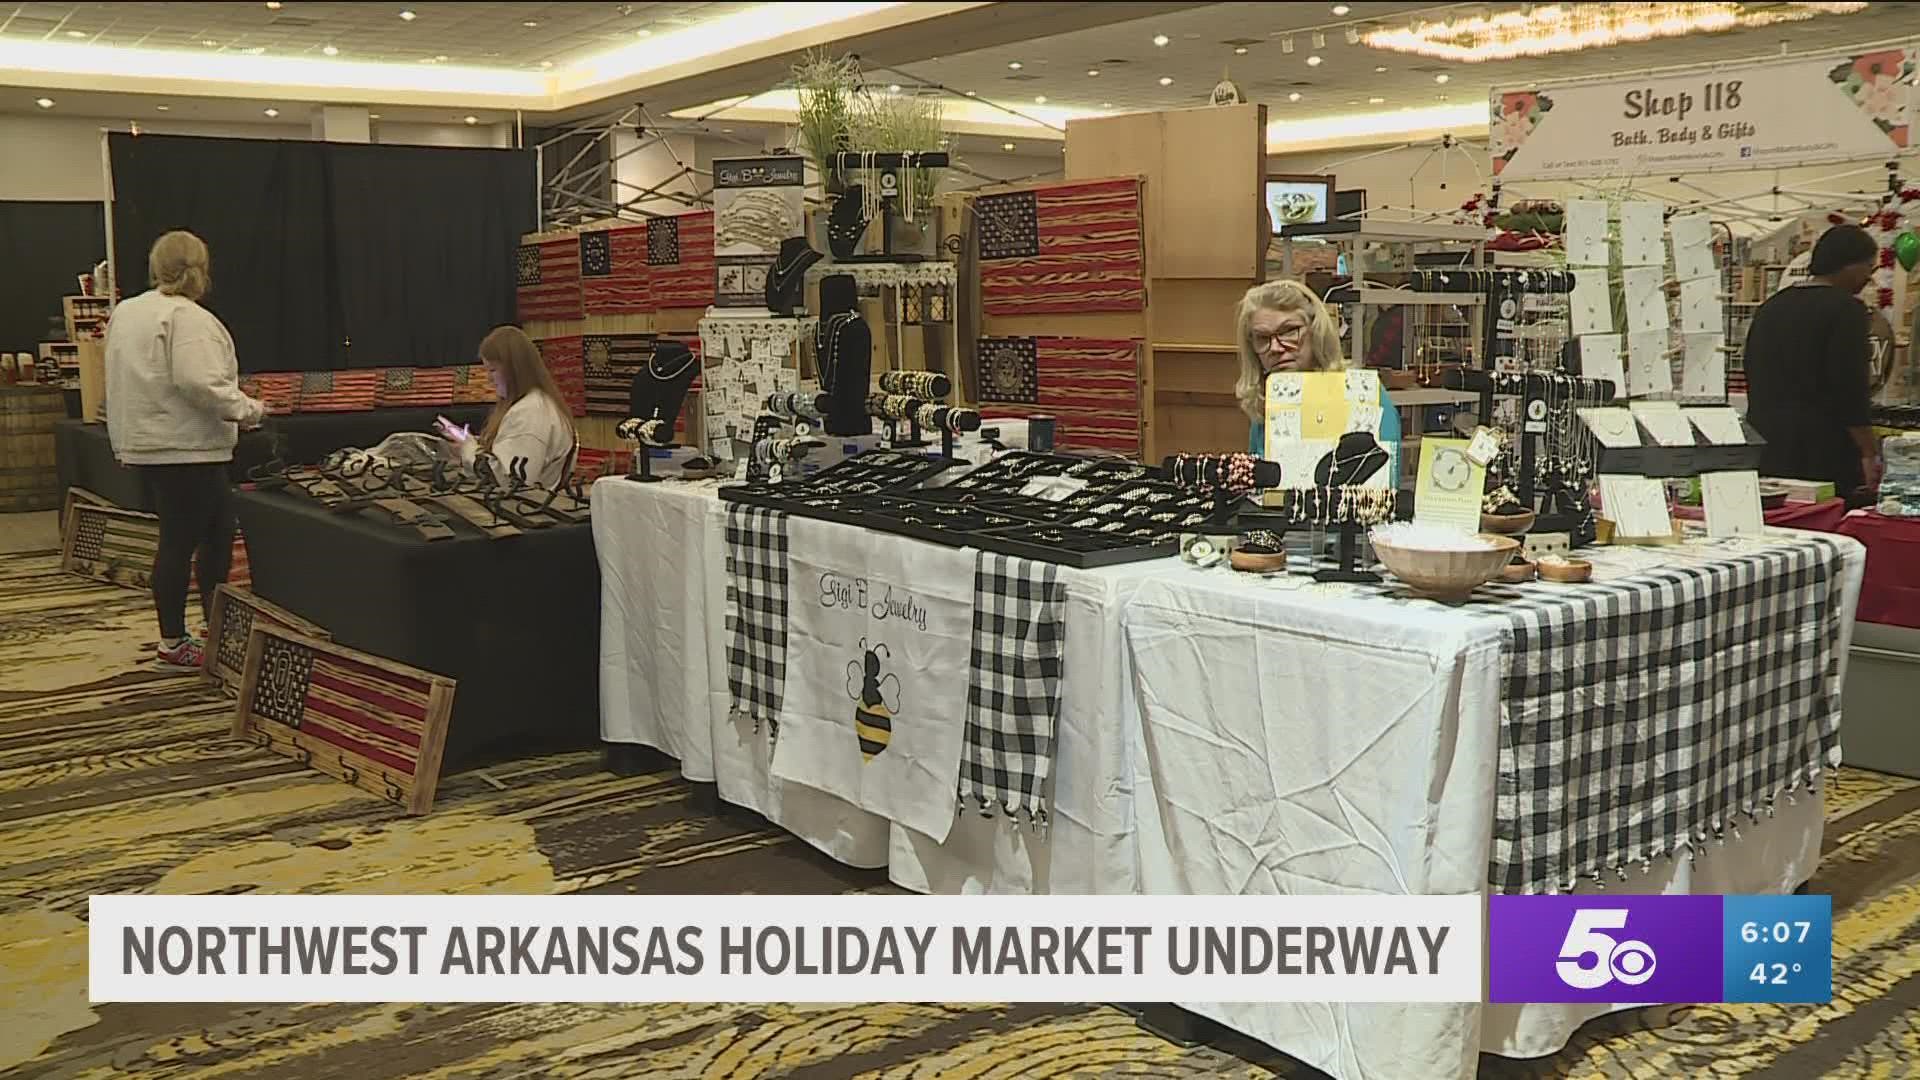 The Northwest Arkansas Holiday Market is happening now in Springdale.